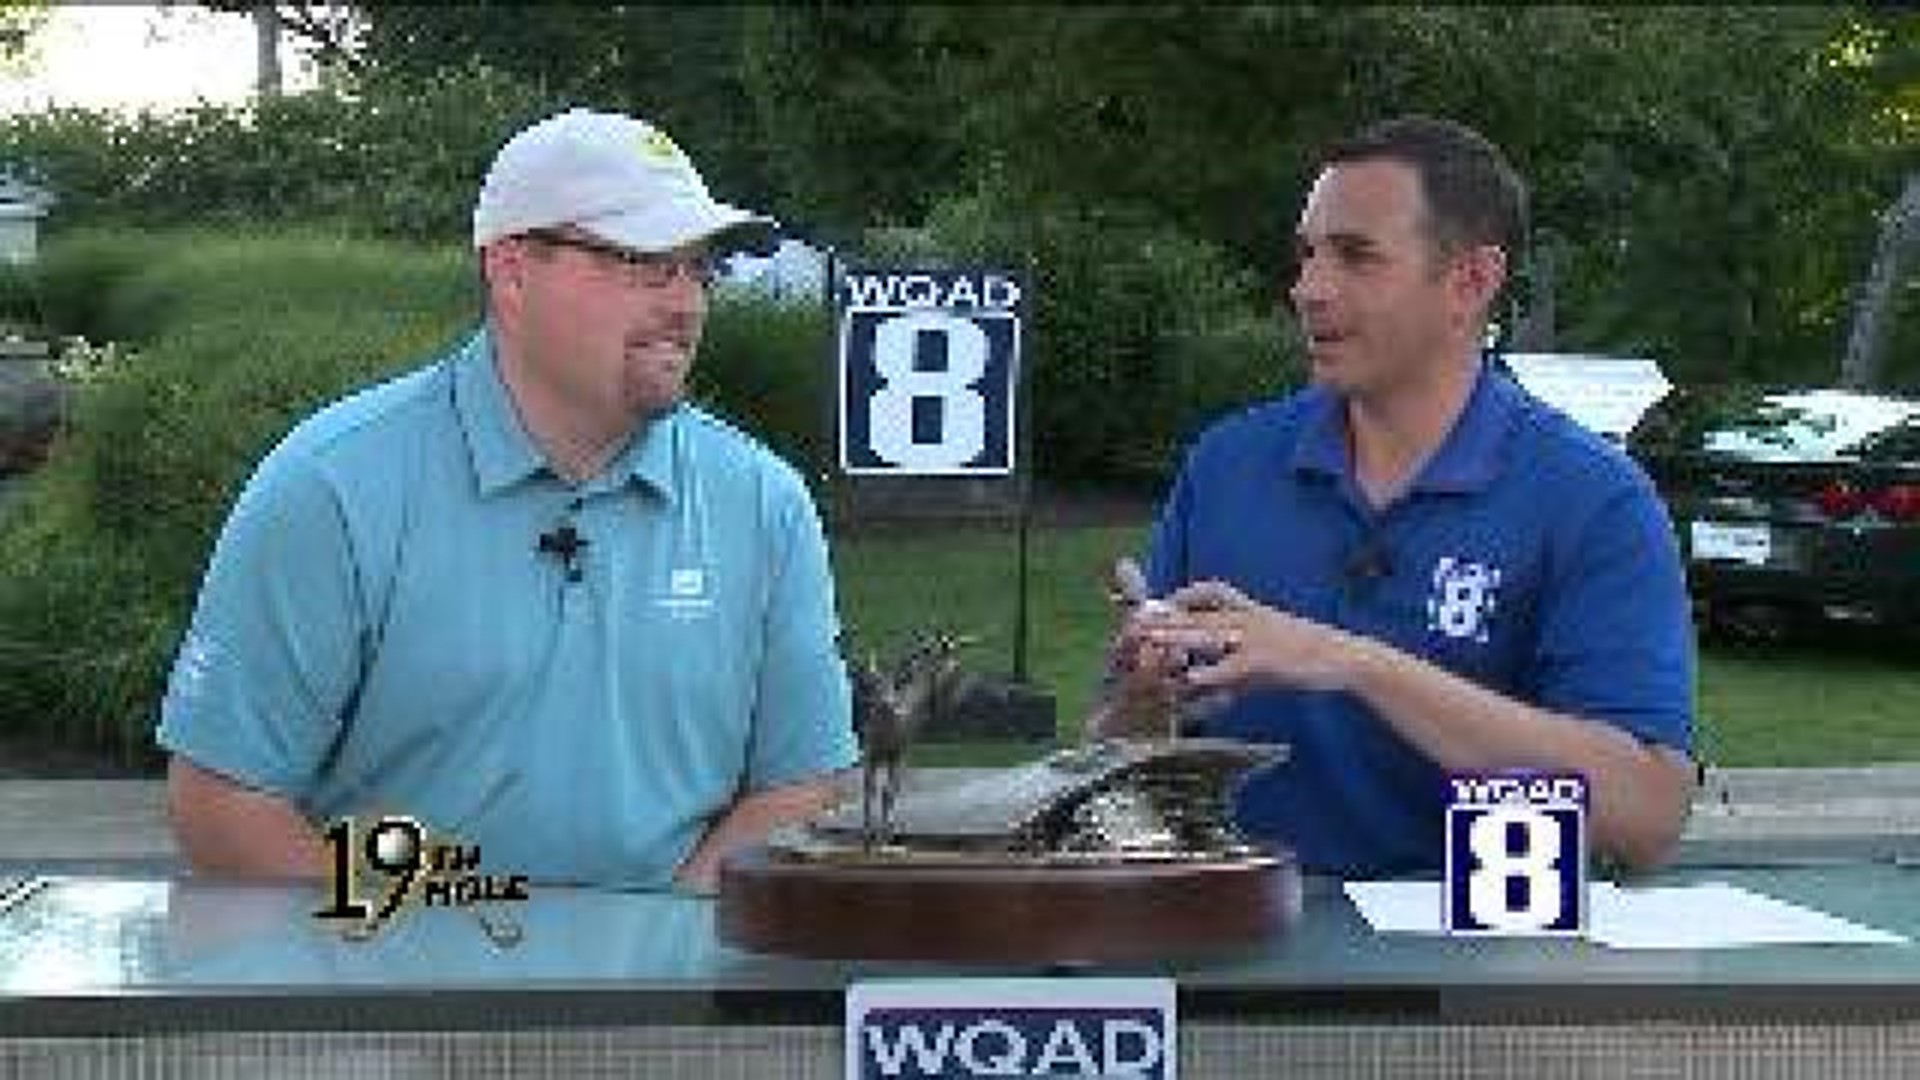 Golf professional discusses JDC Round two